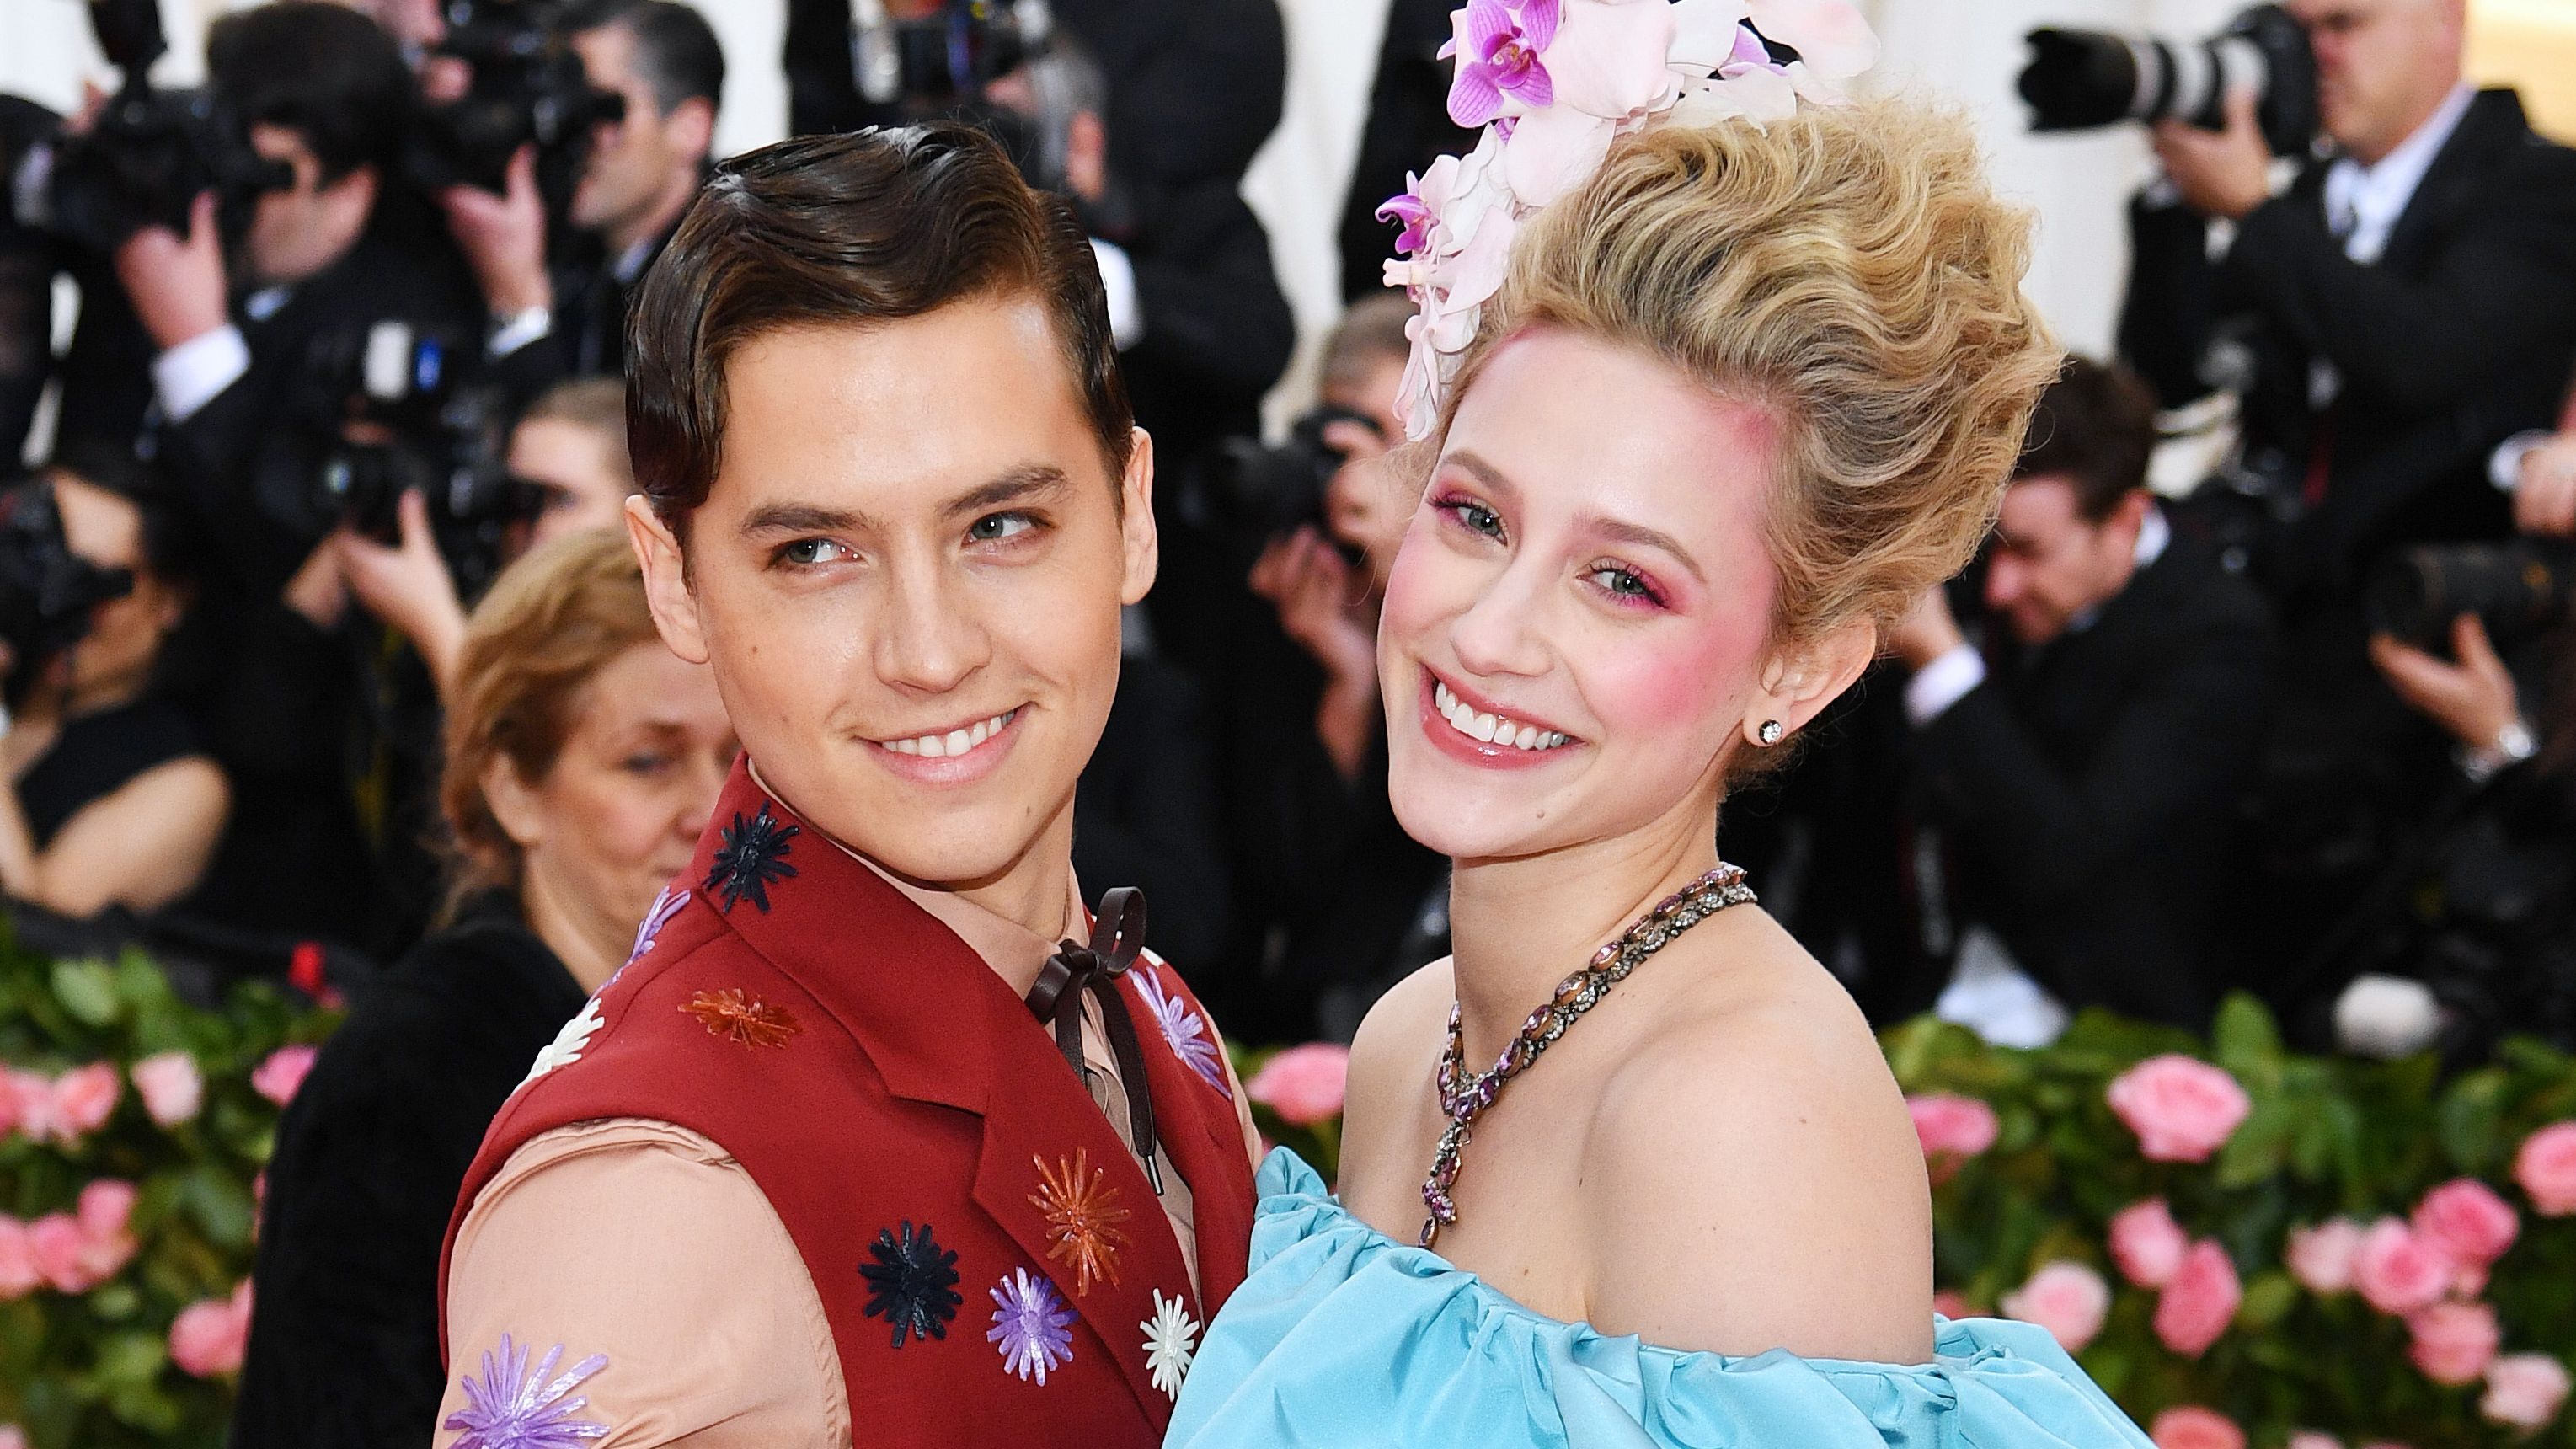 Cole Sprouse And Lili Reinhart Are The Met Gala's Campiest Couple